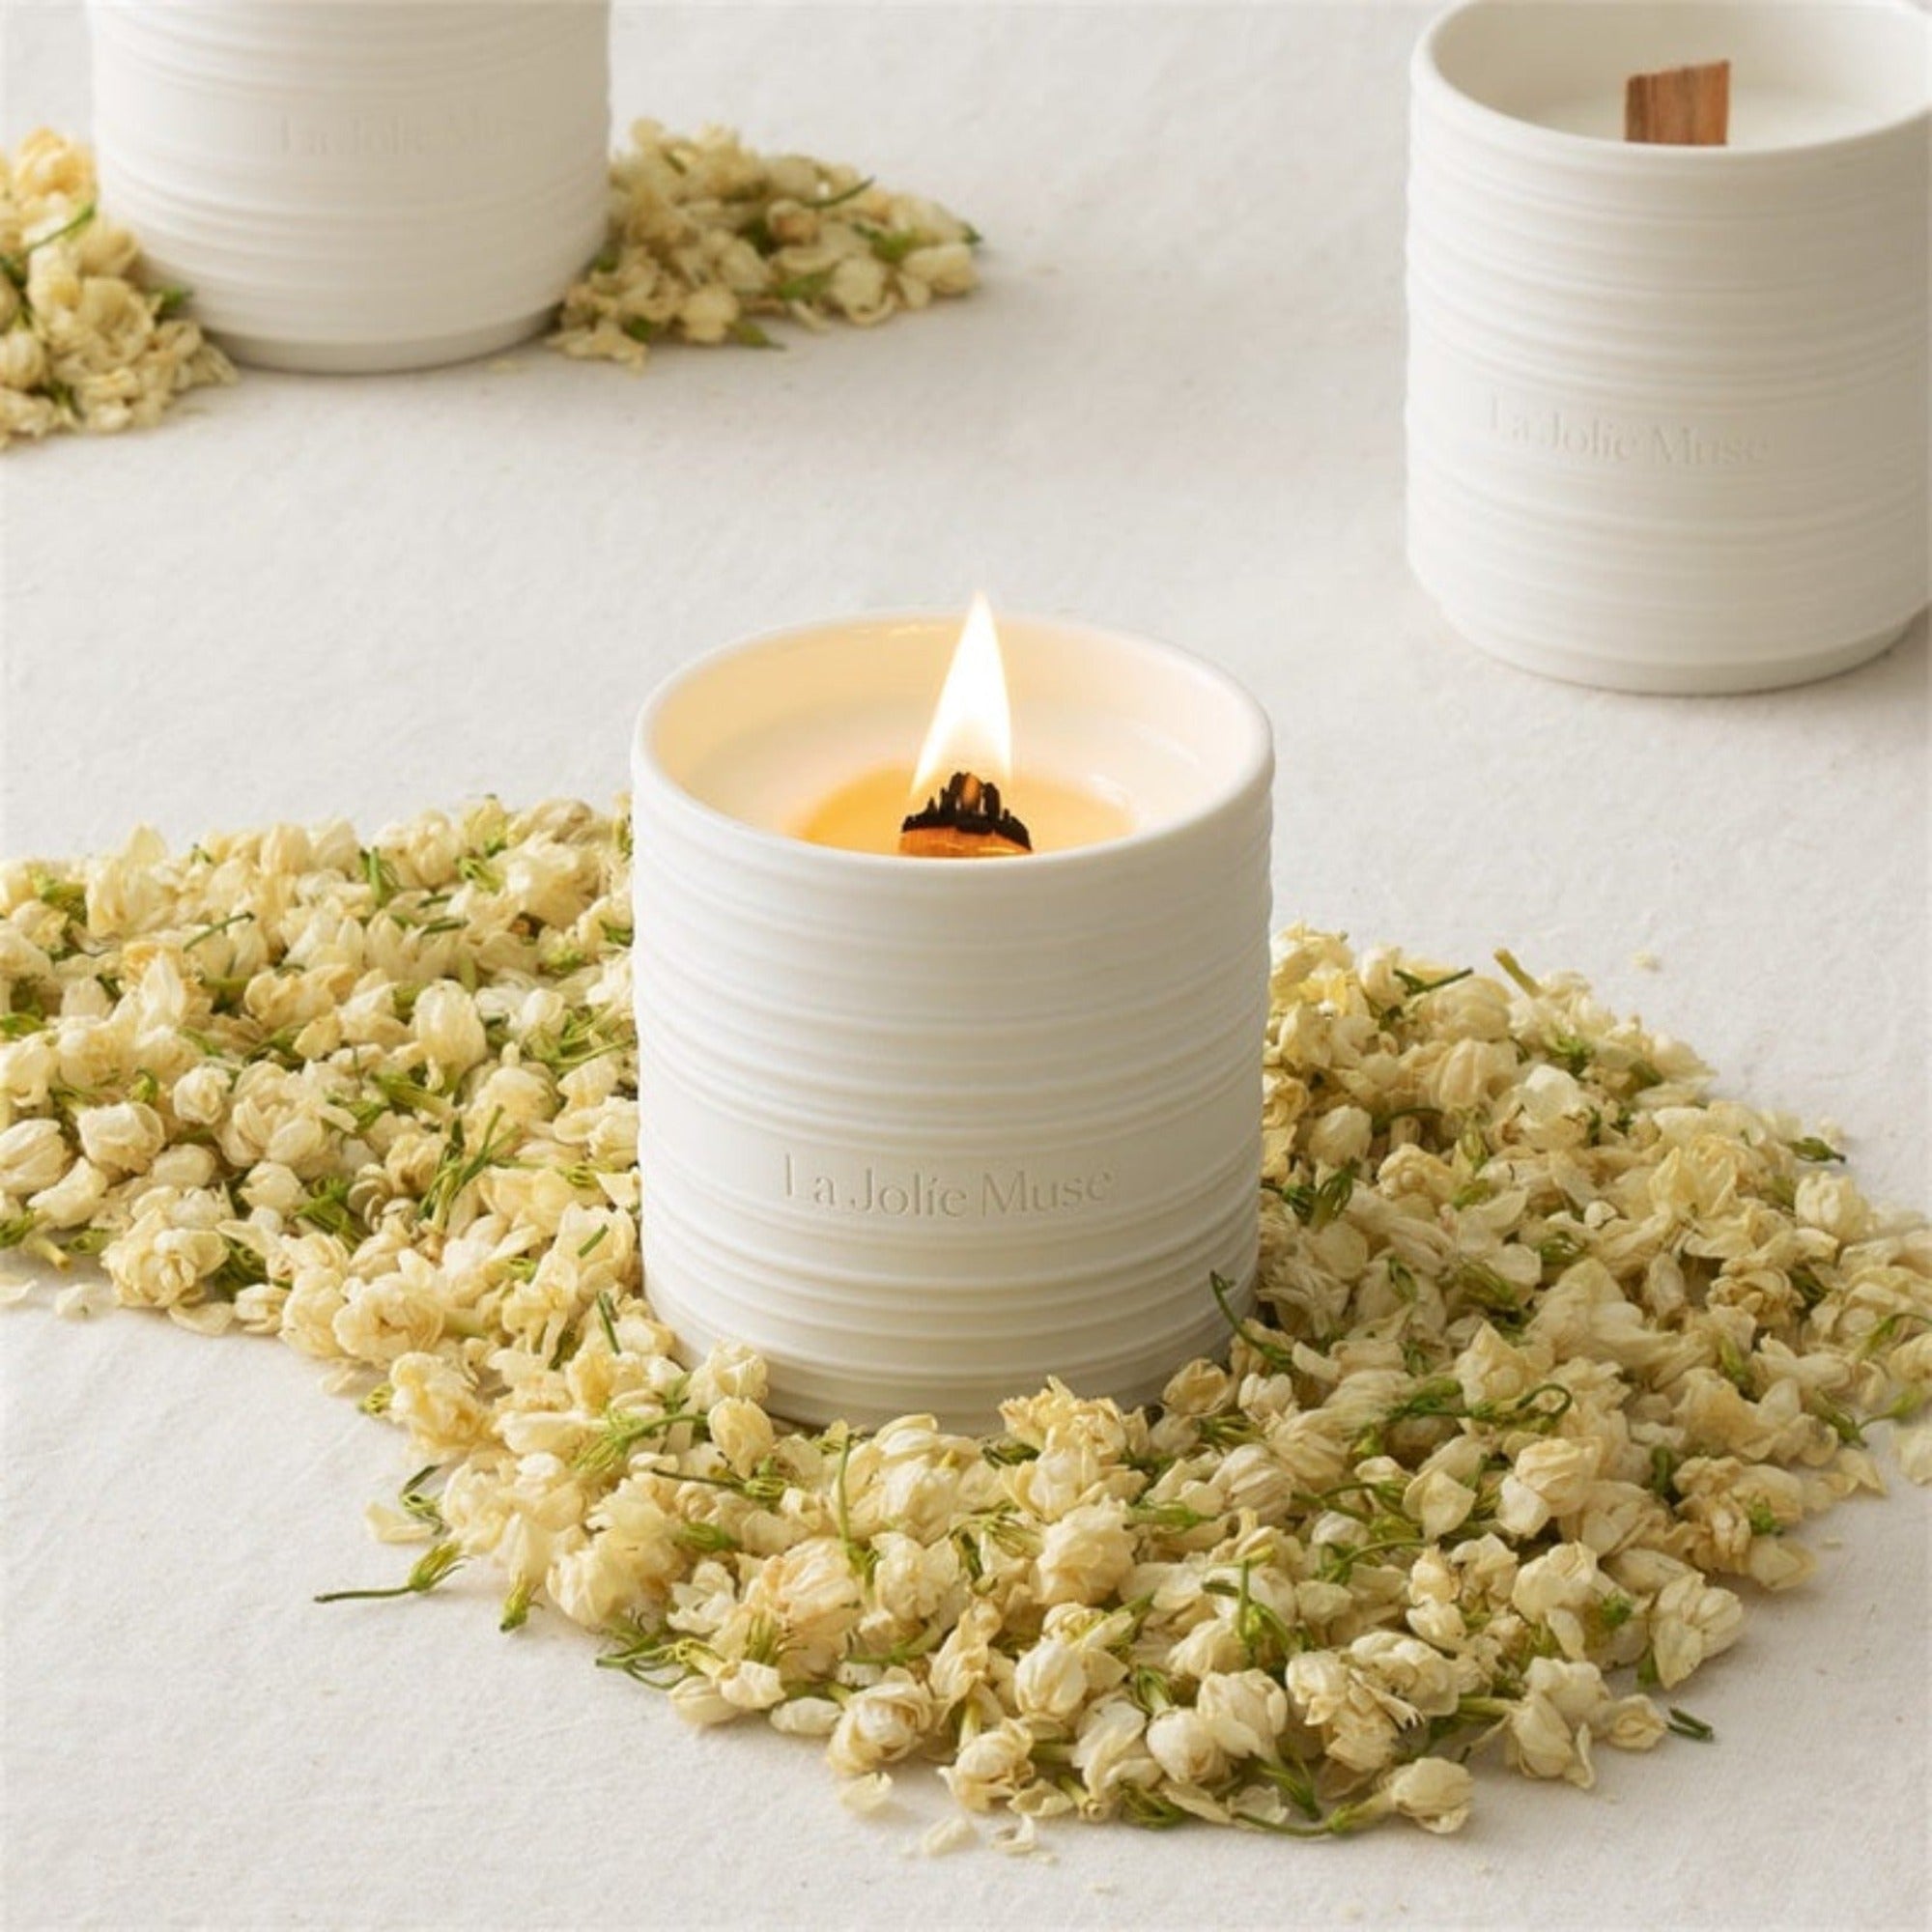 Photo shot of Lucienne - Jasmine Blossom 7.1 oz candles surrounded by full blooms of jasmine flowers